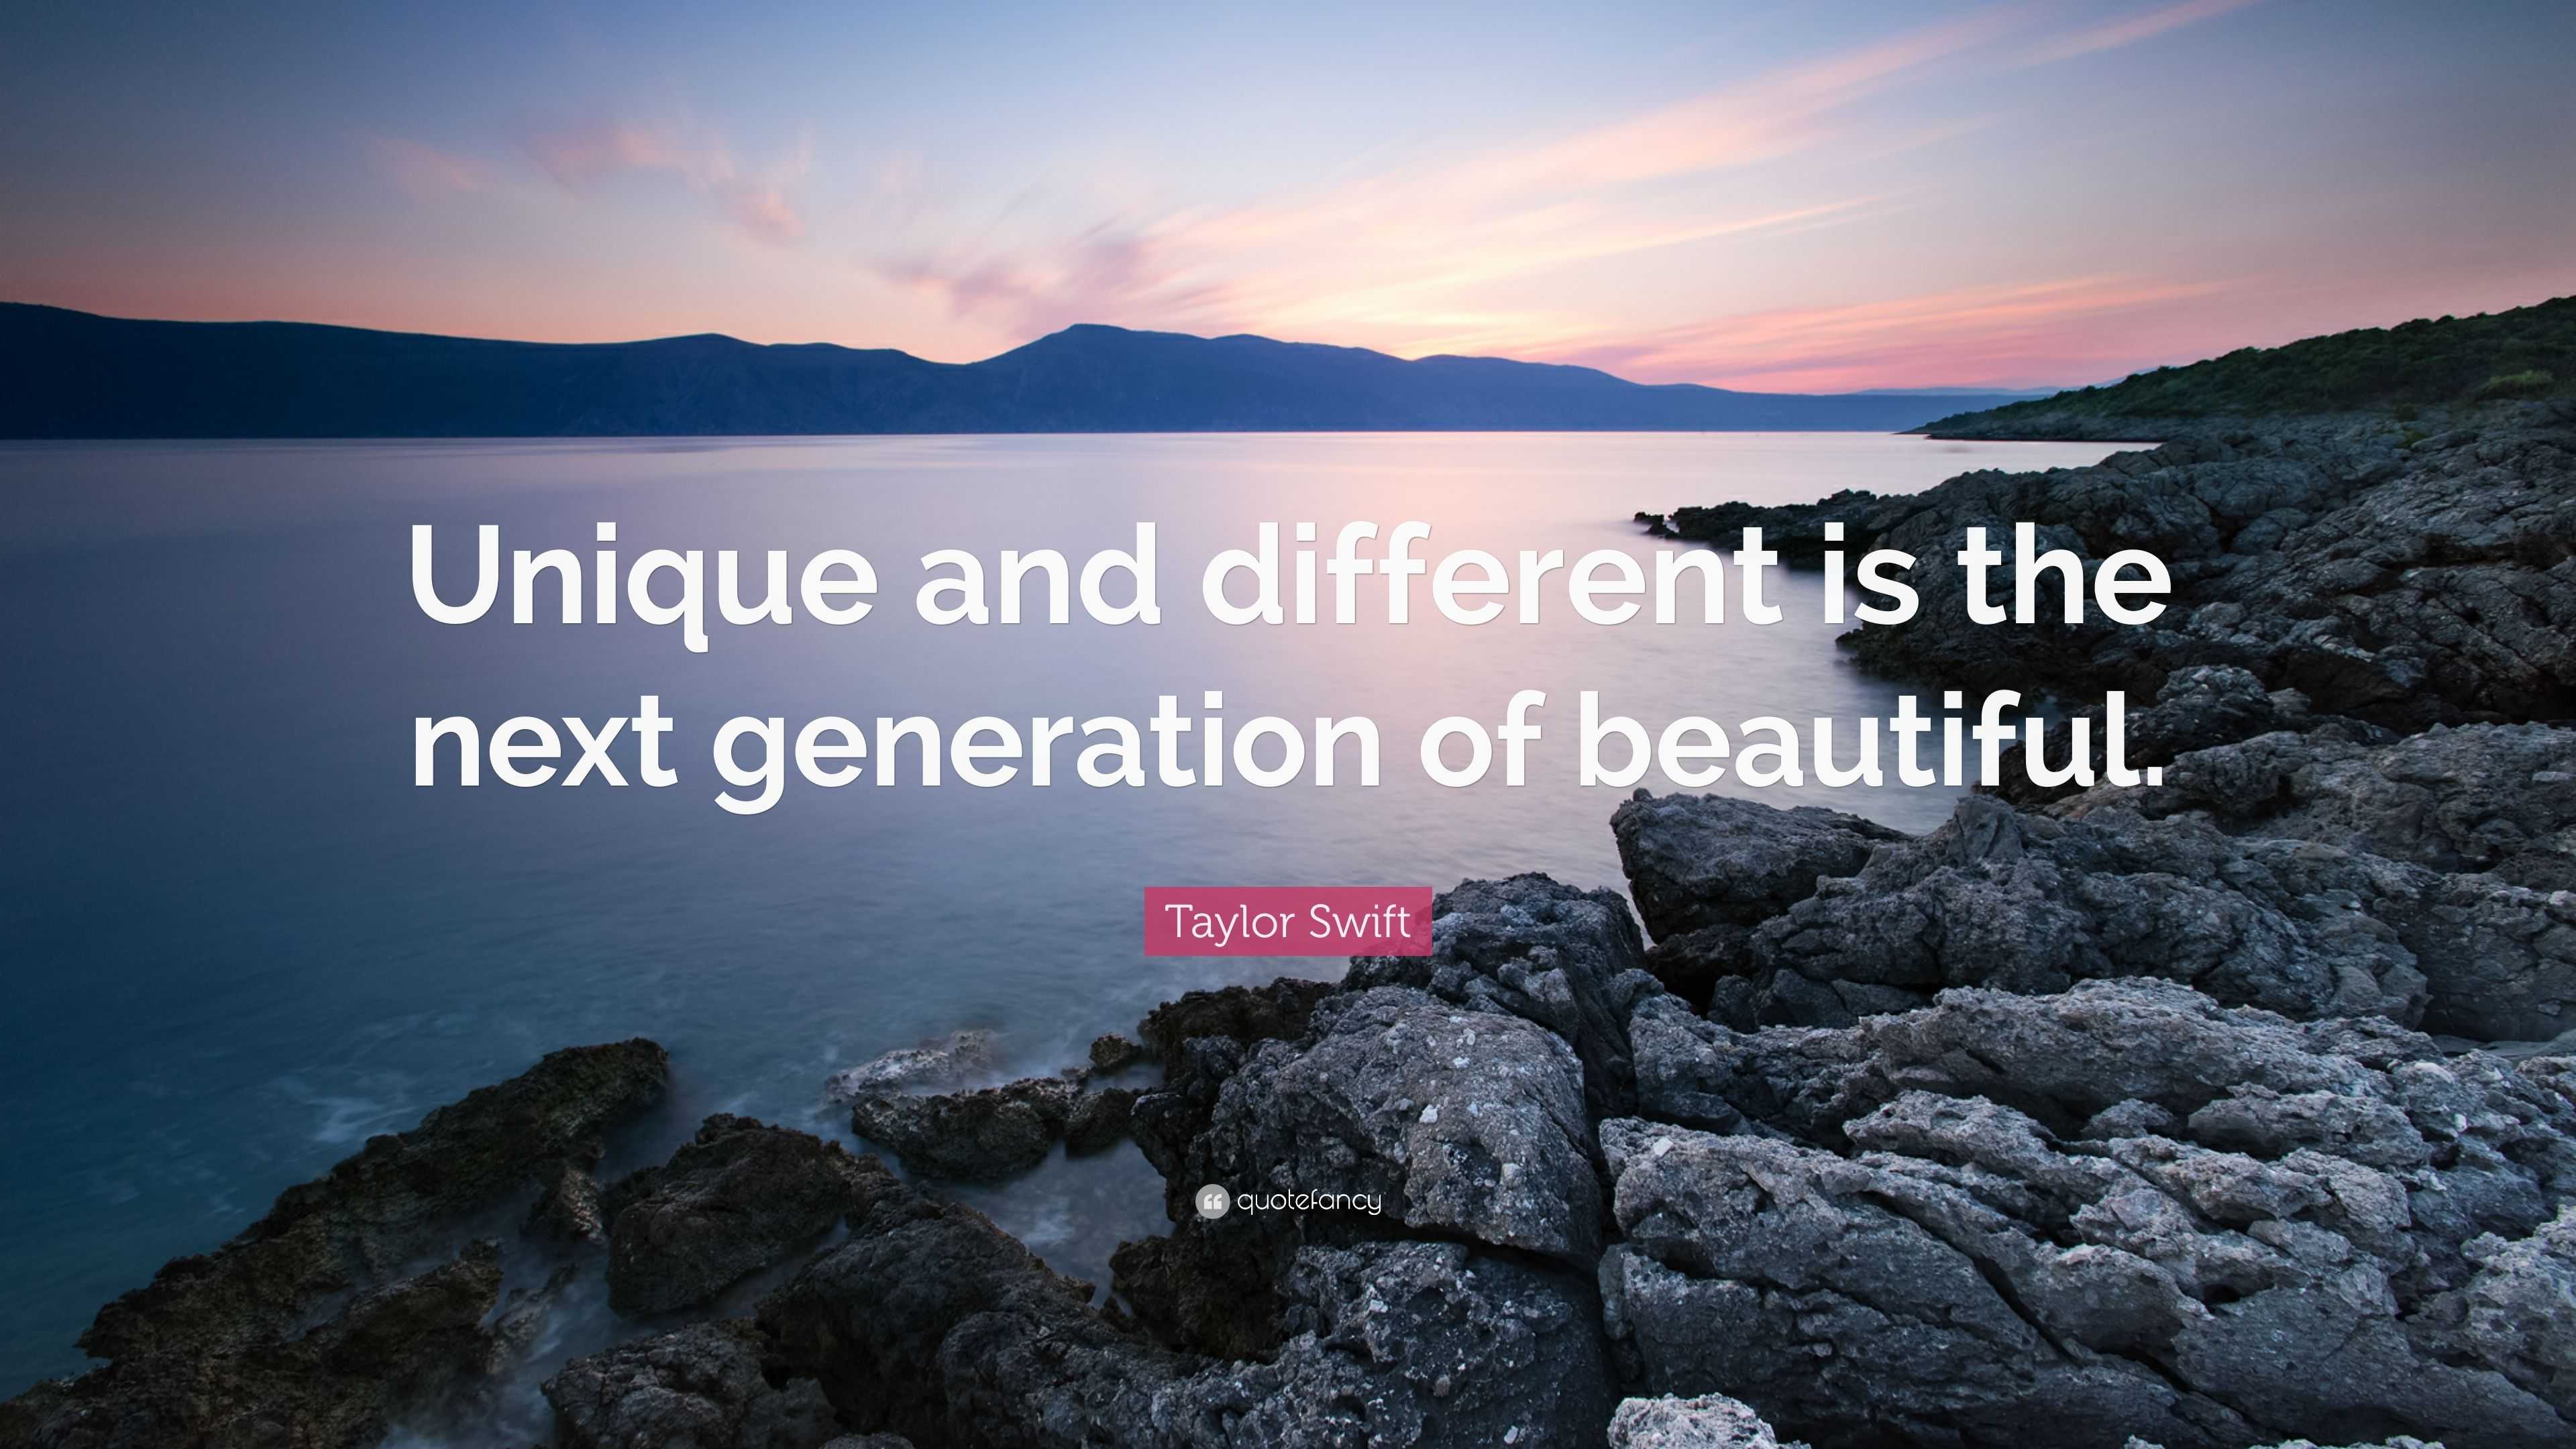 https://quotefancy.com/media/wallpaper/3840x2160/6160274-Taylor-Swift-Quote-Unique-and-different-is-the-next-generation-of.jpg